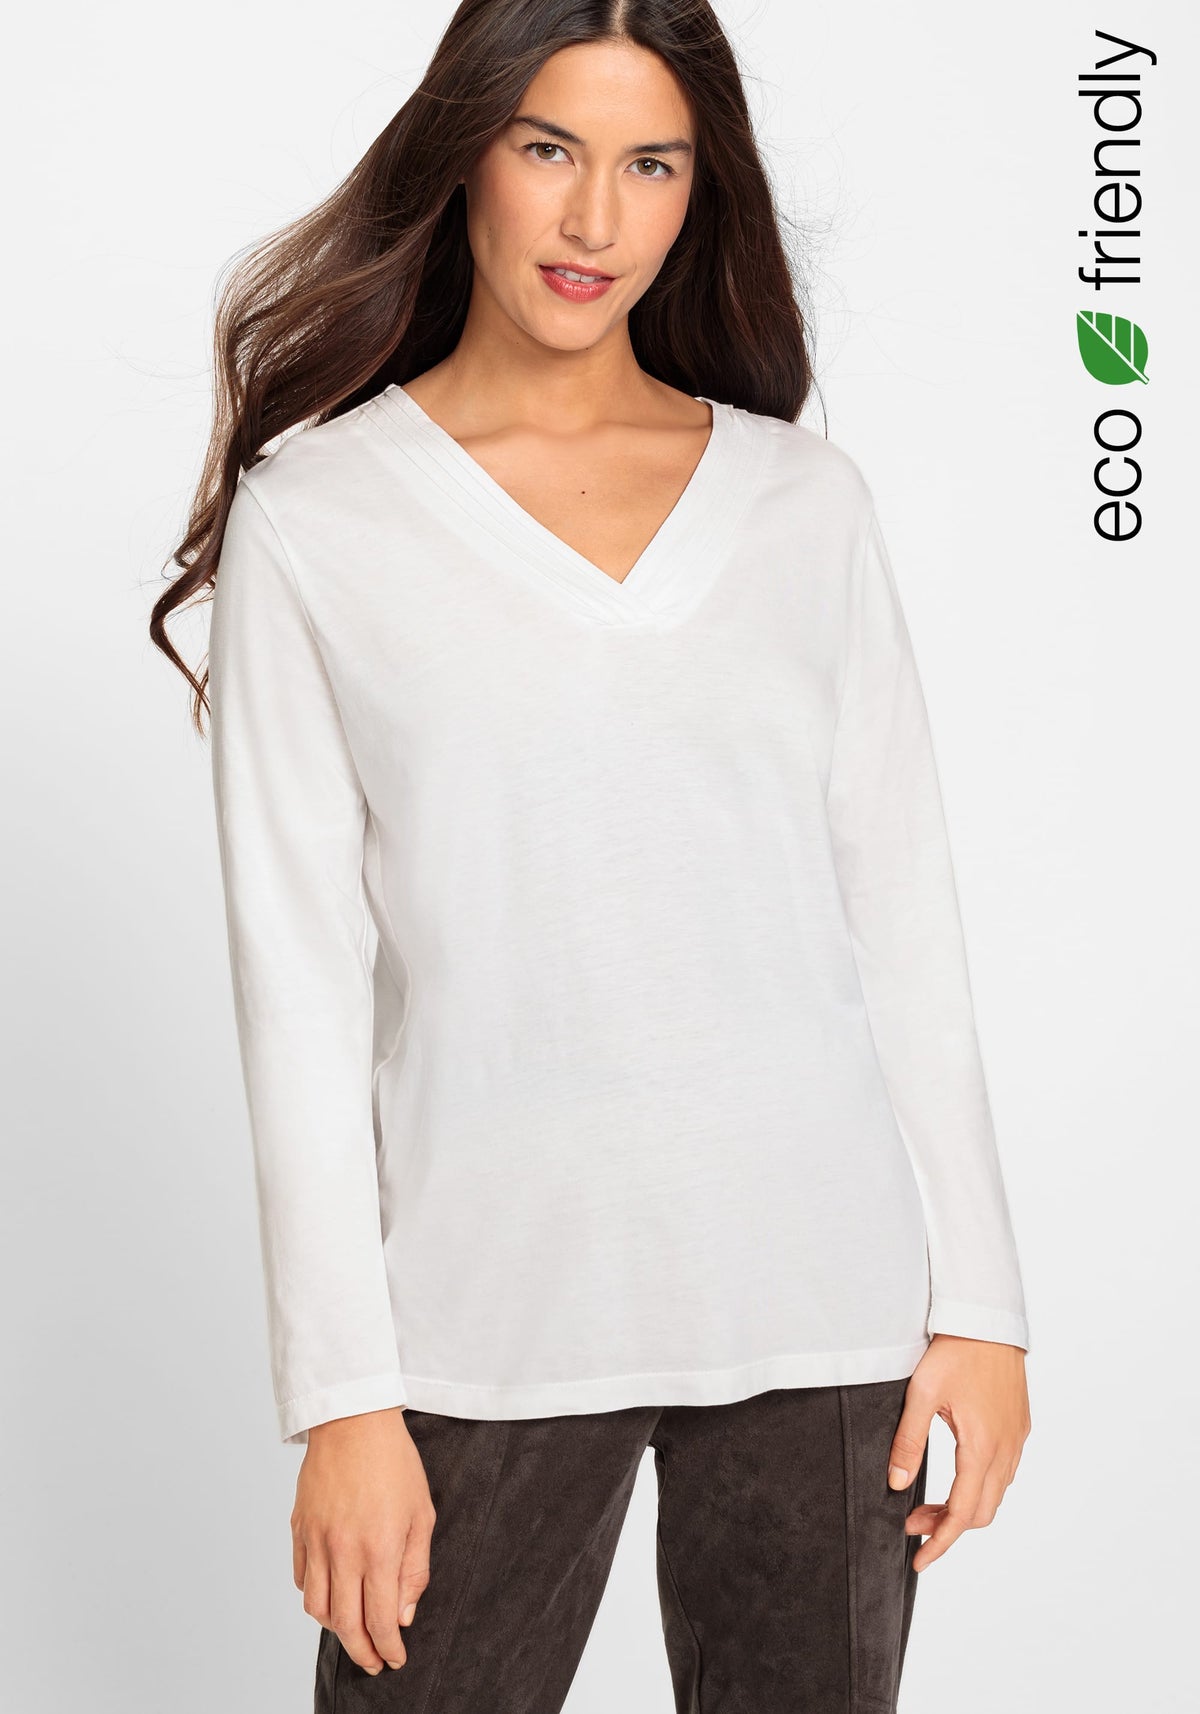 Long Sleeve Solid V-Neck T-Shirt containing TENCEL™ Modal